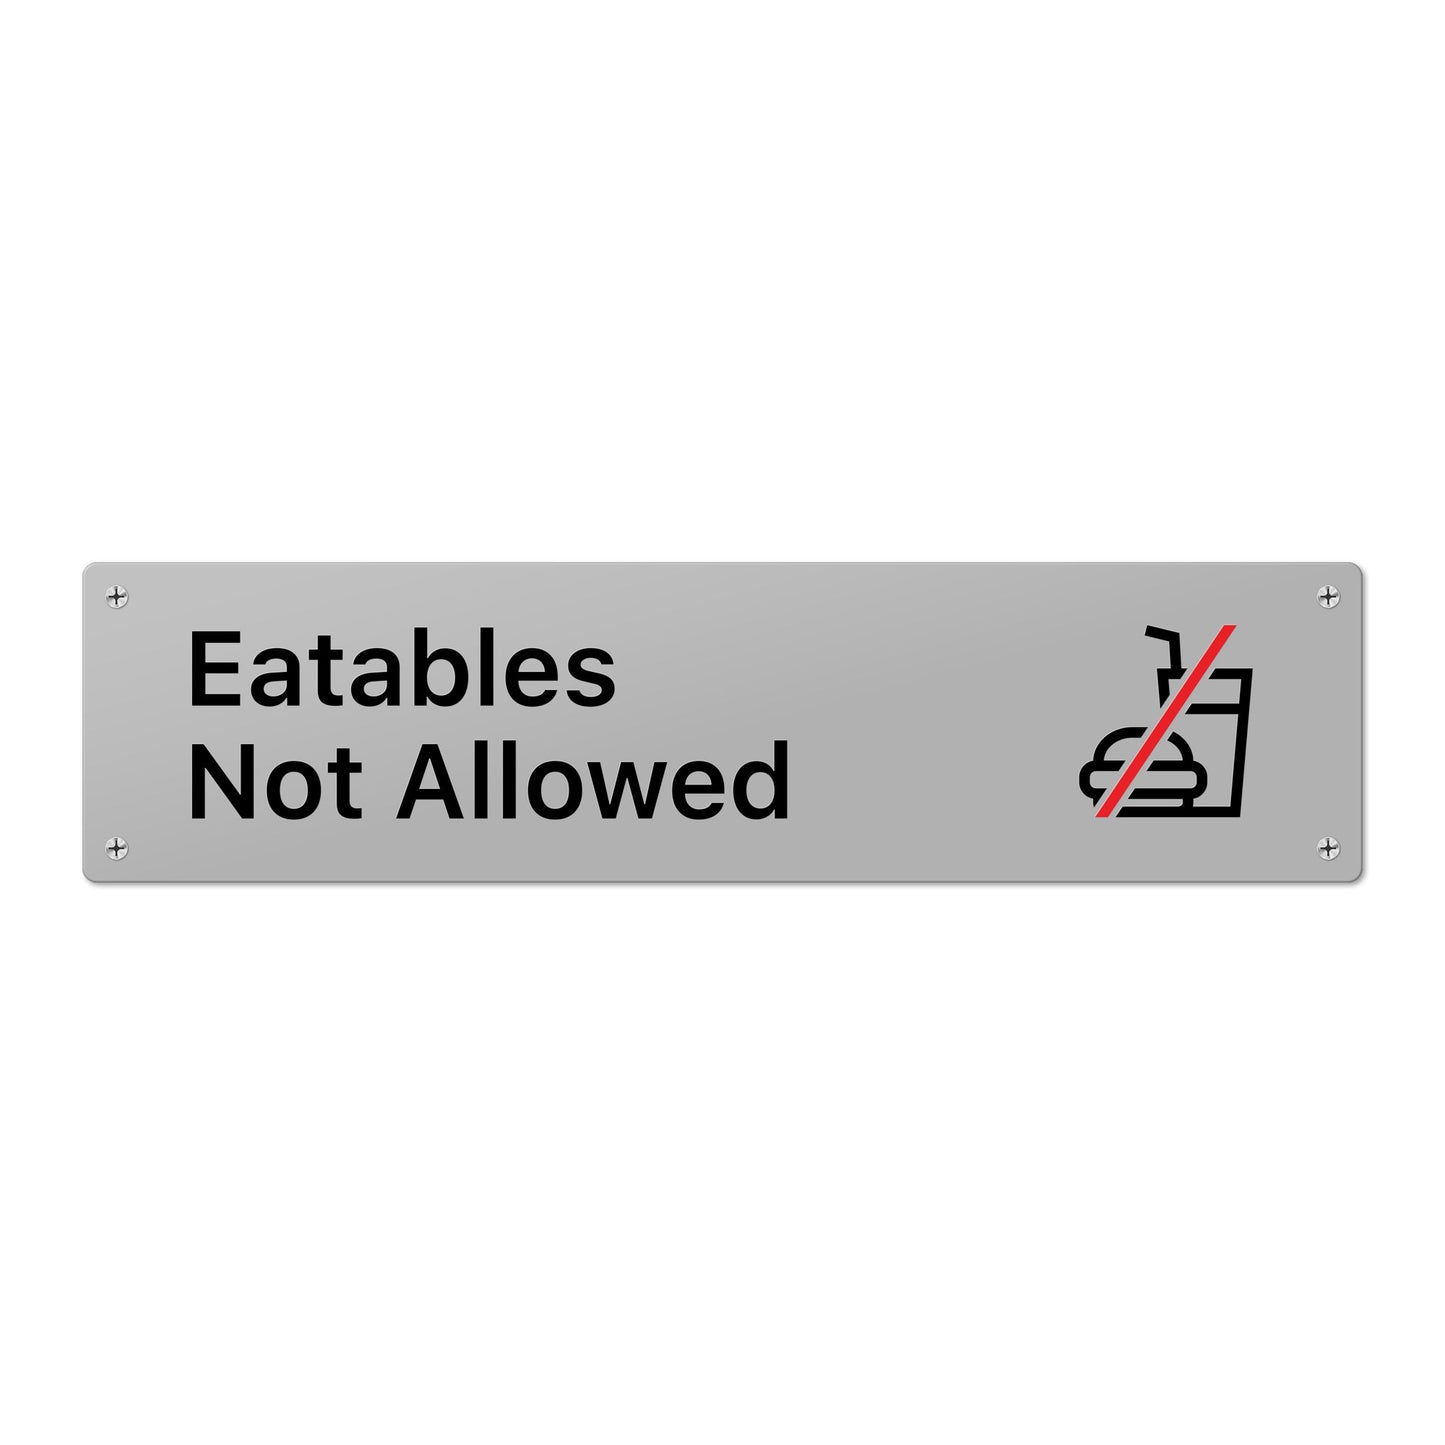 Eatables Not Allowed